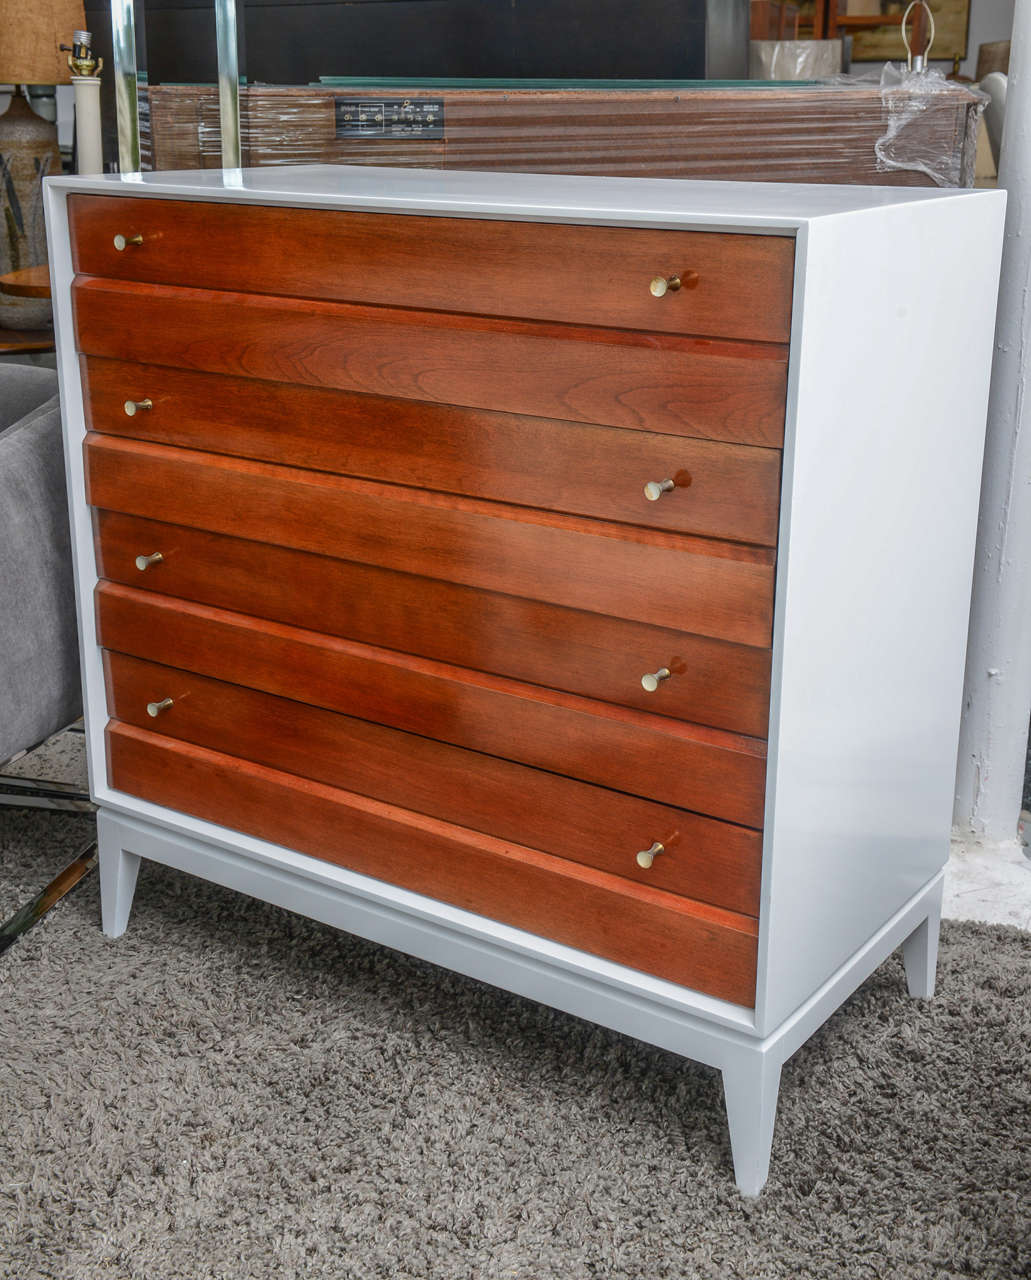 Restored Heywood Wakefield dresser with walnut drawers and white lacquer cabinet, 1960s, USA.